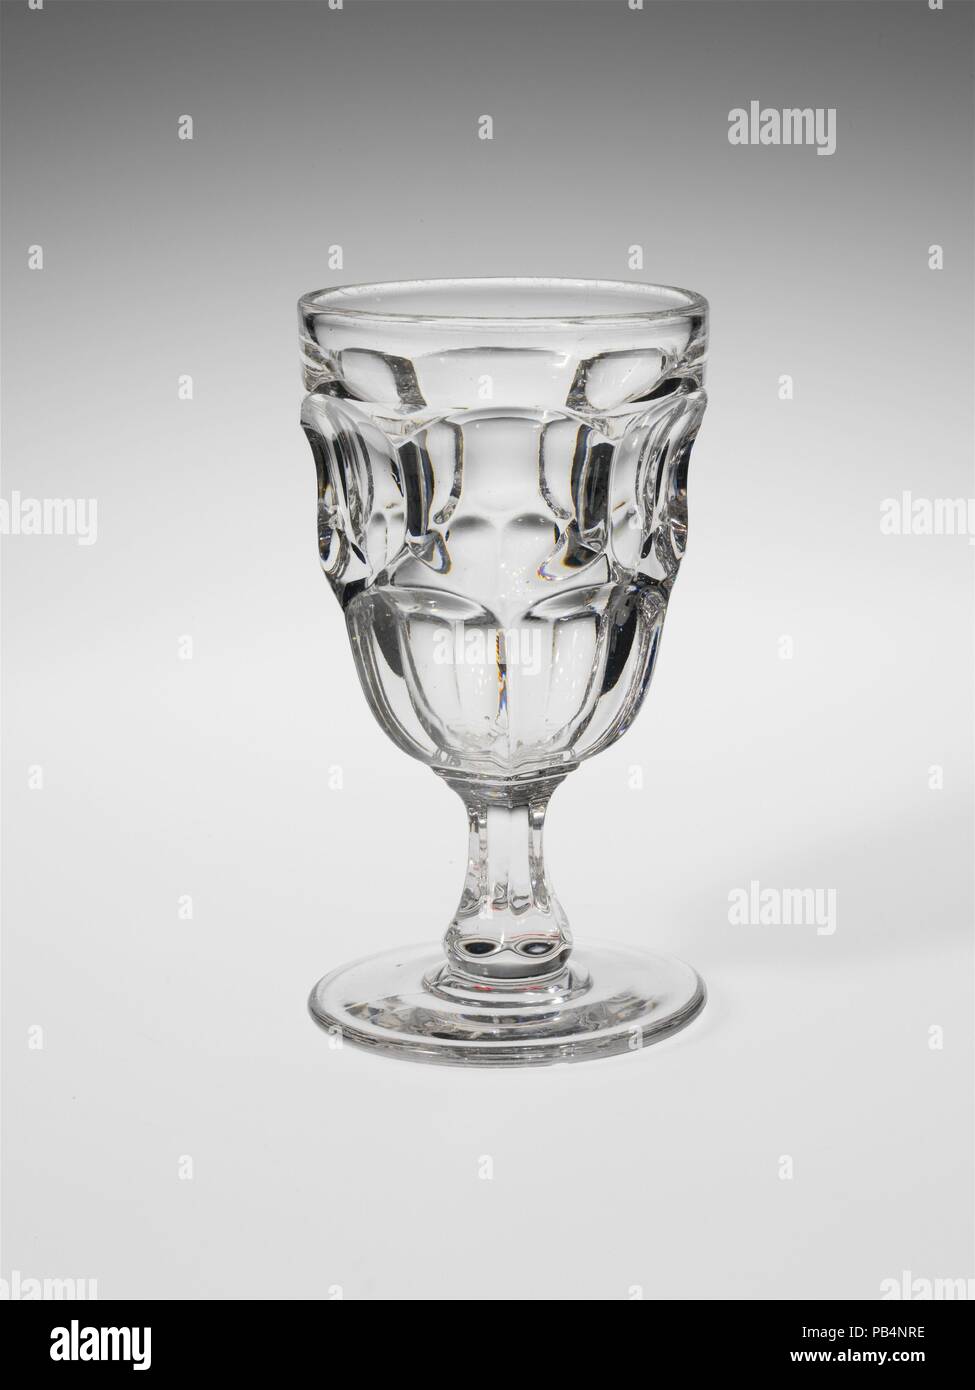 Goblet. Culture: American. Dimensions: H. 6 in. (15.2 cm). Date: 1830-70.  With the development of new formulas and techniques, glass-pressing technology had improved markedly by the late 1840s. By this time, pressed tablewares were being produced in large matching sets and innumerable forms. During the mid-1850s, colorless glass and simple geometric patterns dominated. Catering to the demand for moderately-priced dining wares, the glass industry in the United States expanded widely, and numerous factories supplied less expensive pressed glassware to the growing market. At the Exhibition of th Stock Photo